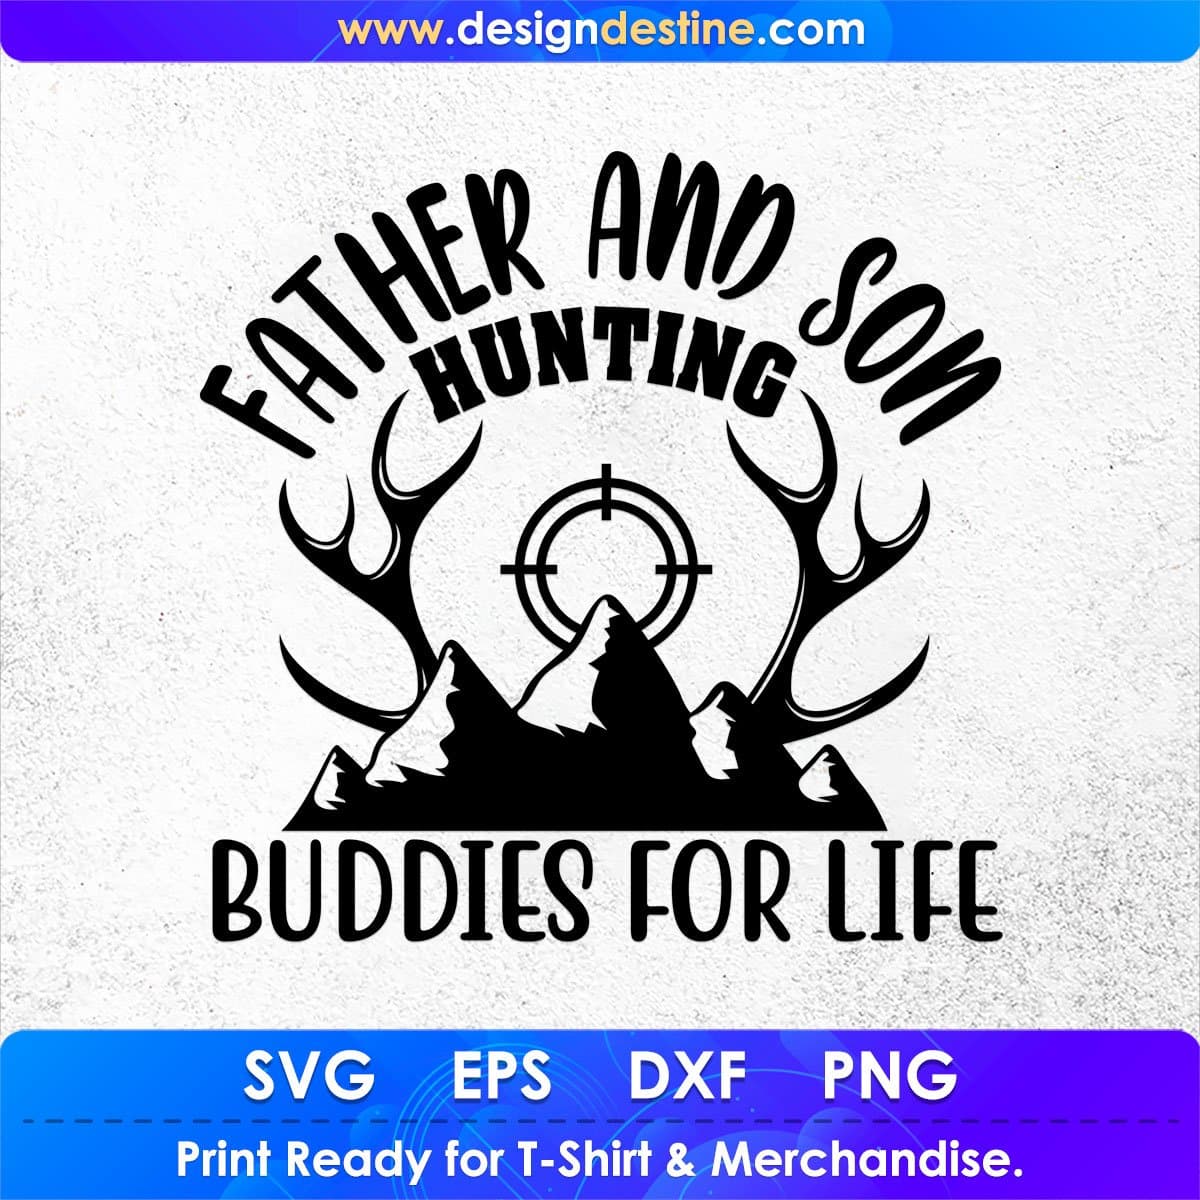 Father And Son Hunting Buddies For Life T shirt Design In Svg Png